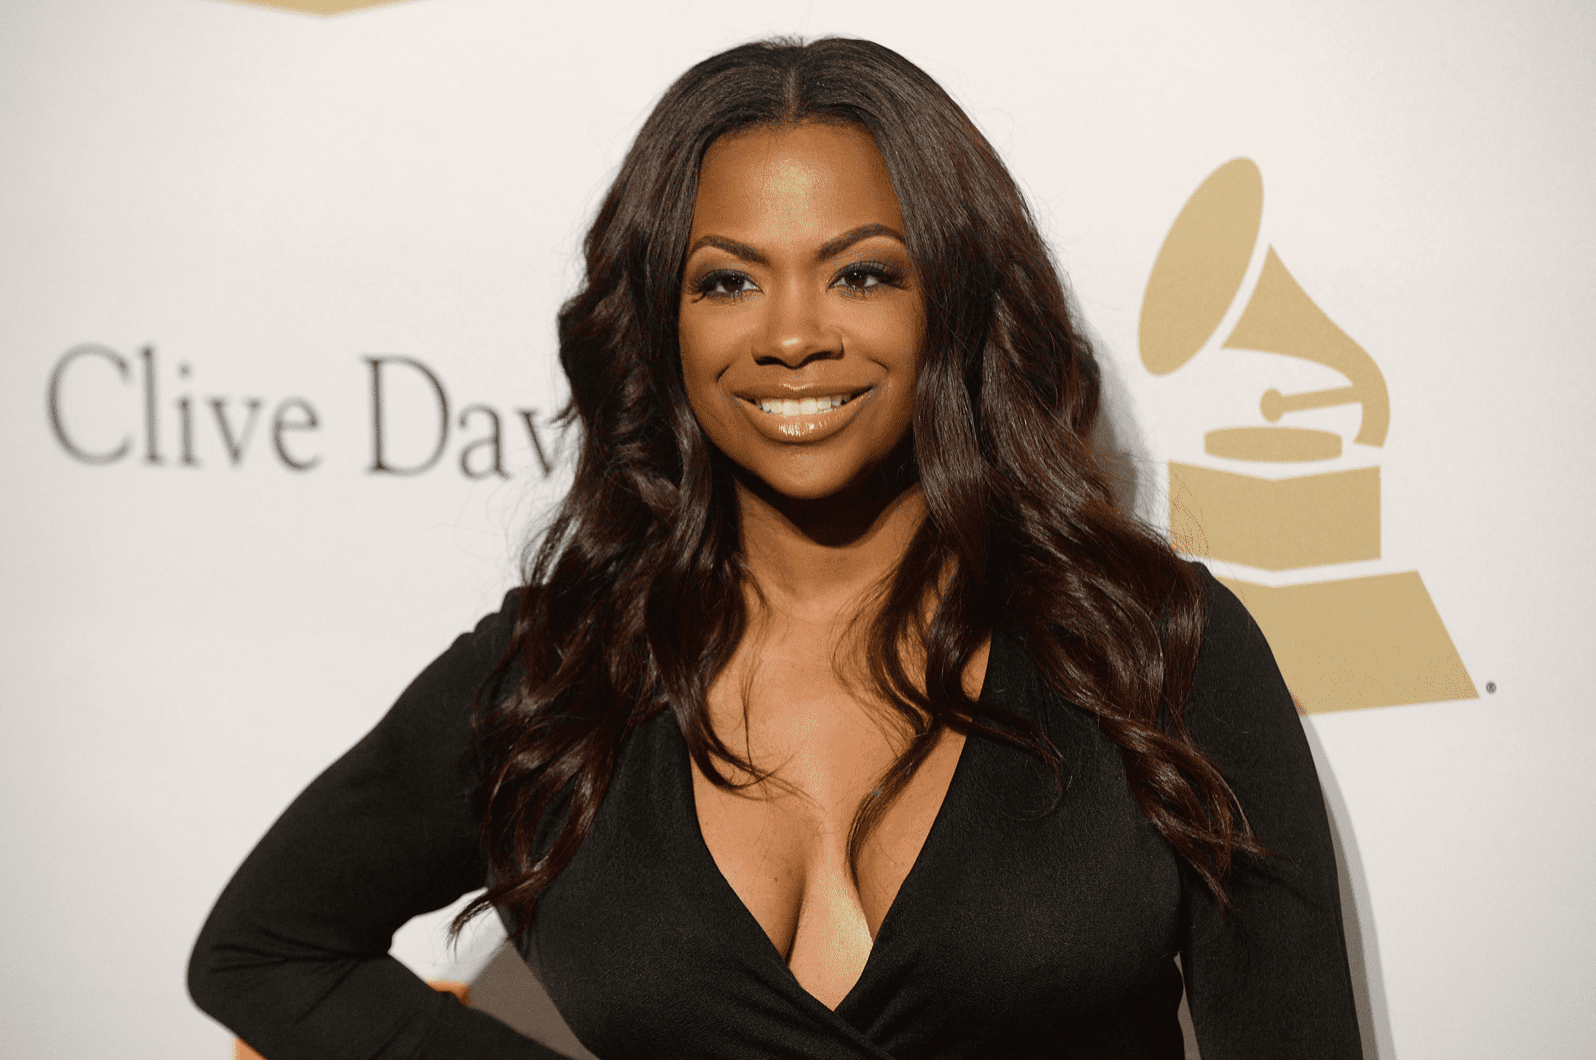 Kandi Burruss during the 2017 Pre-Grammy Gala and Salute to Industry Icons at The Beverly Hilton Hotel on February 11, 2017 in Beverly Hills, California. | Source: Getty Images